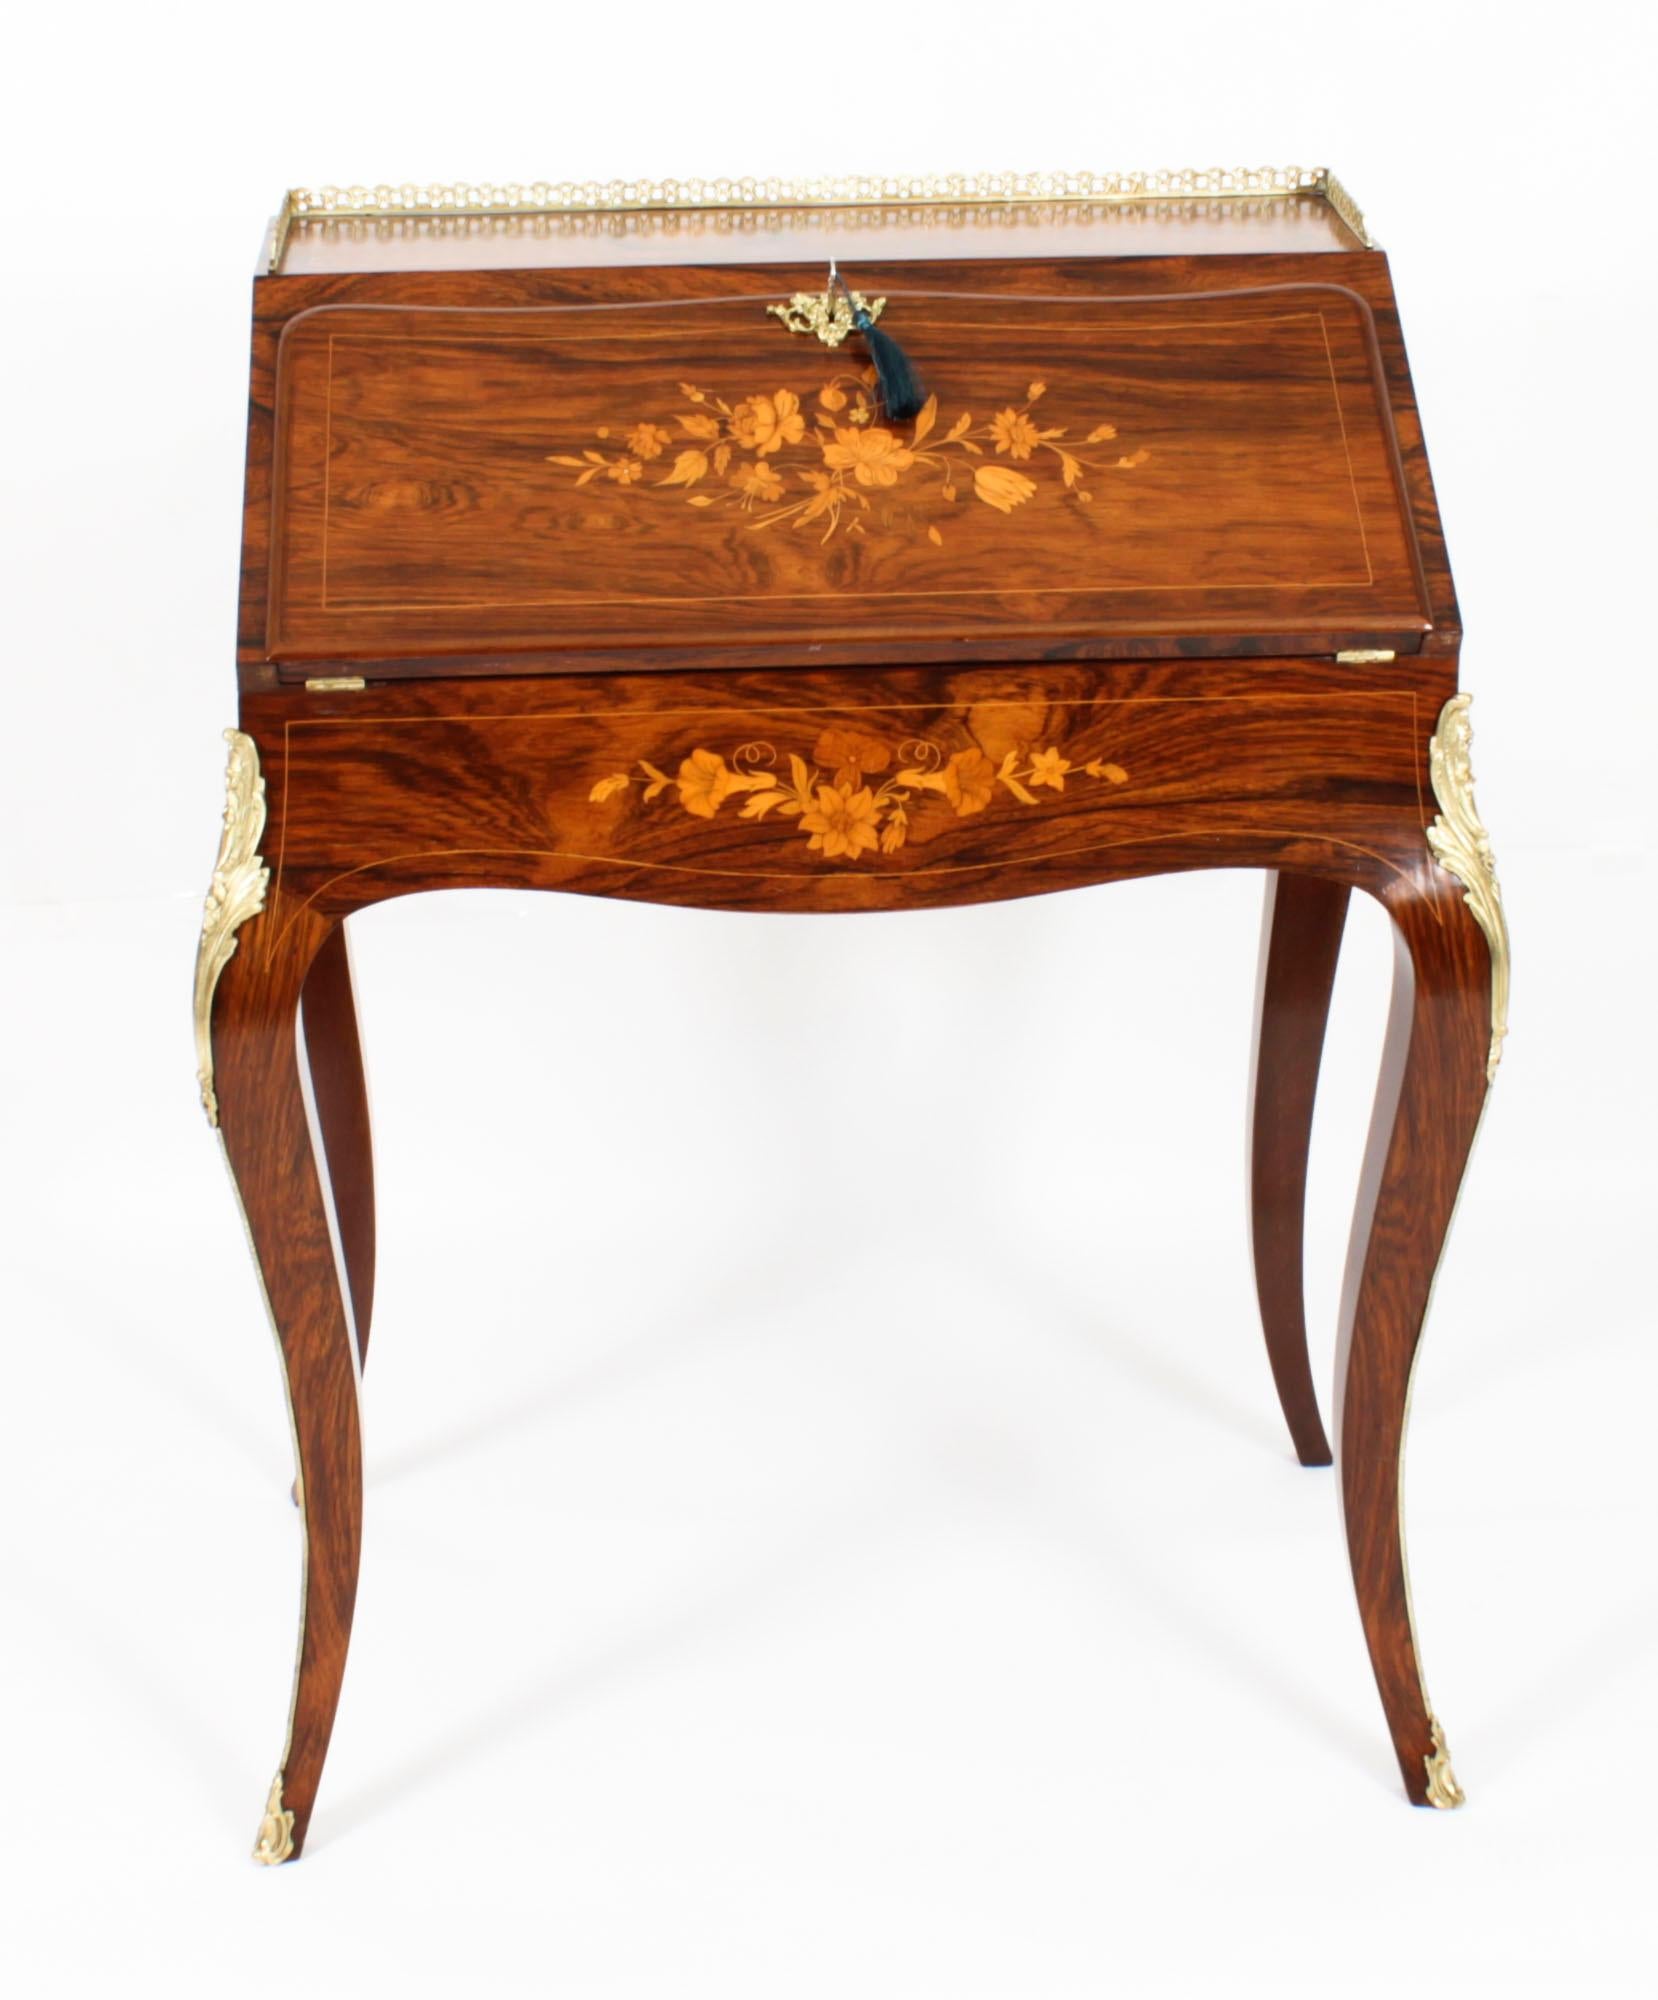 This is an elegant antique French Louis Revival ormolu mounted Gonçalo Alves bureau de dame, dating from circa 1860.
The fall front features floral marquetry decoration and opens to reveal a fitted interior with a six pigeon holes, three small